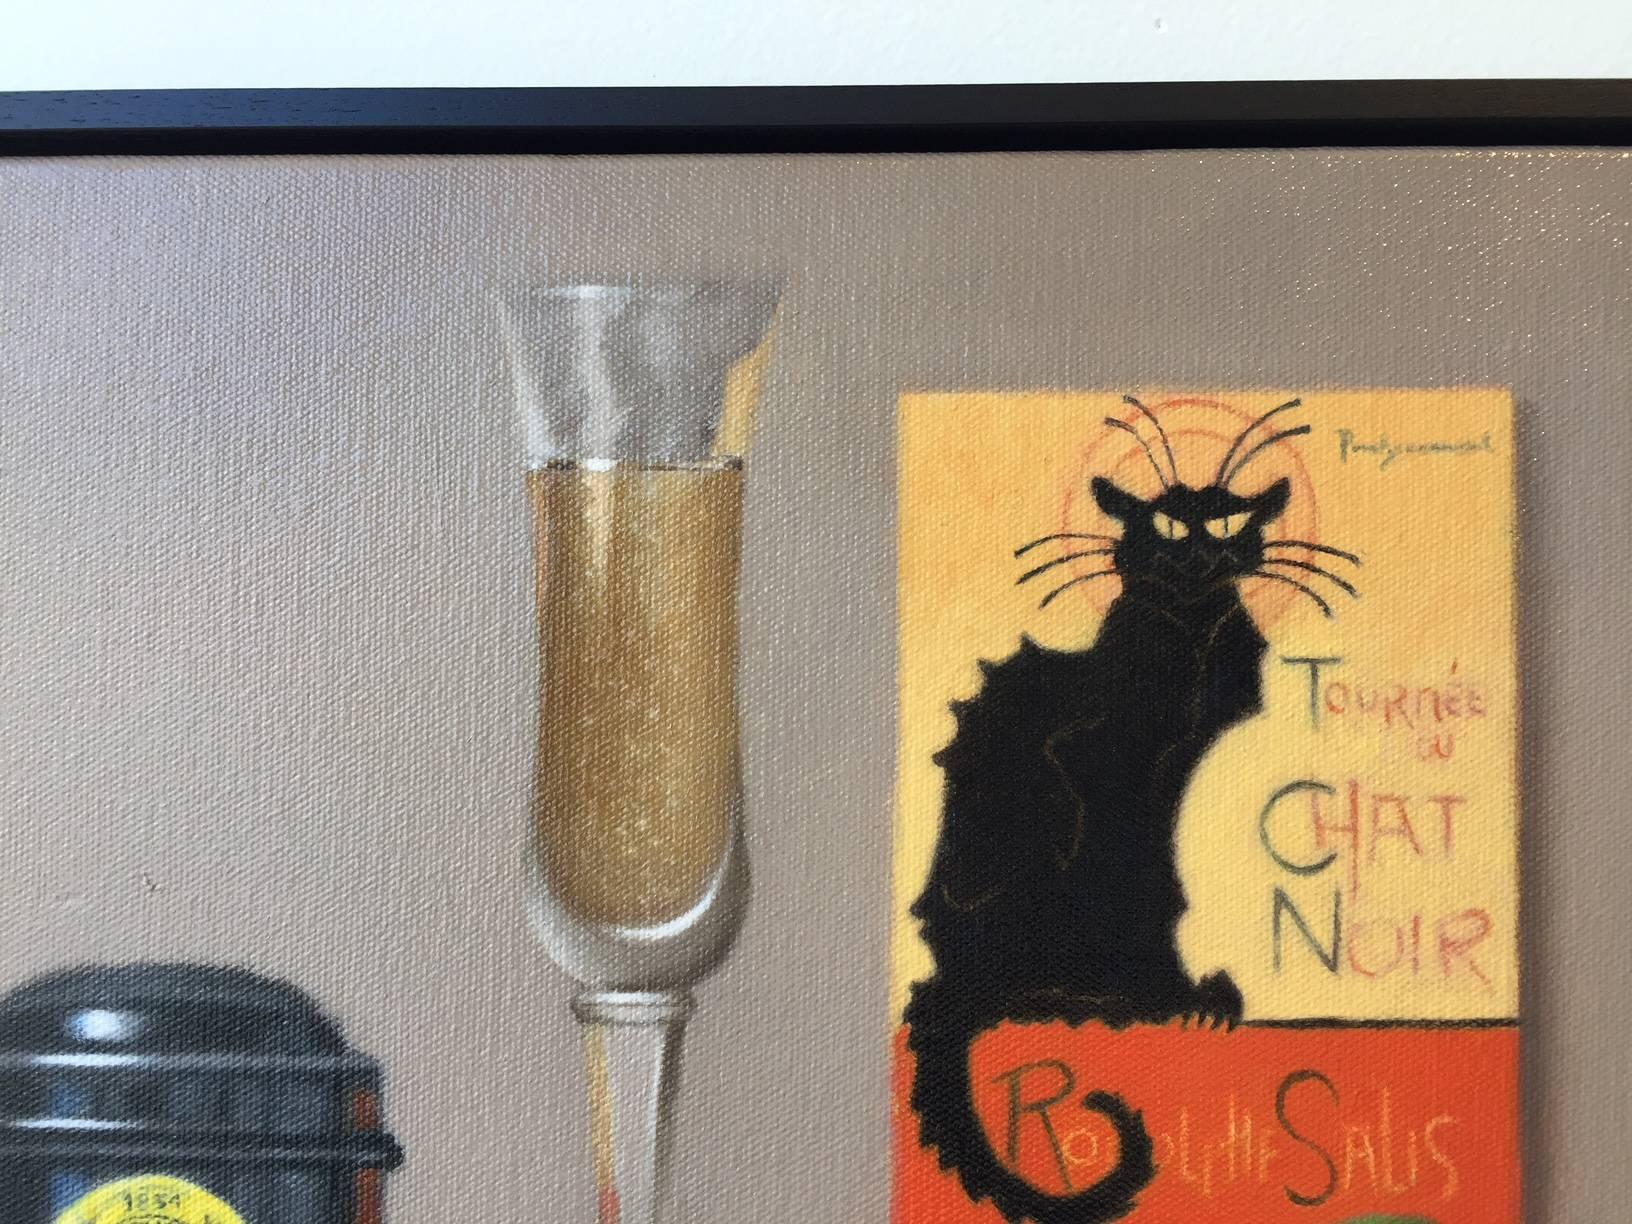 Paris / oil on linen with coffee and black cat 1